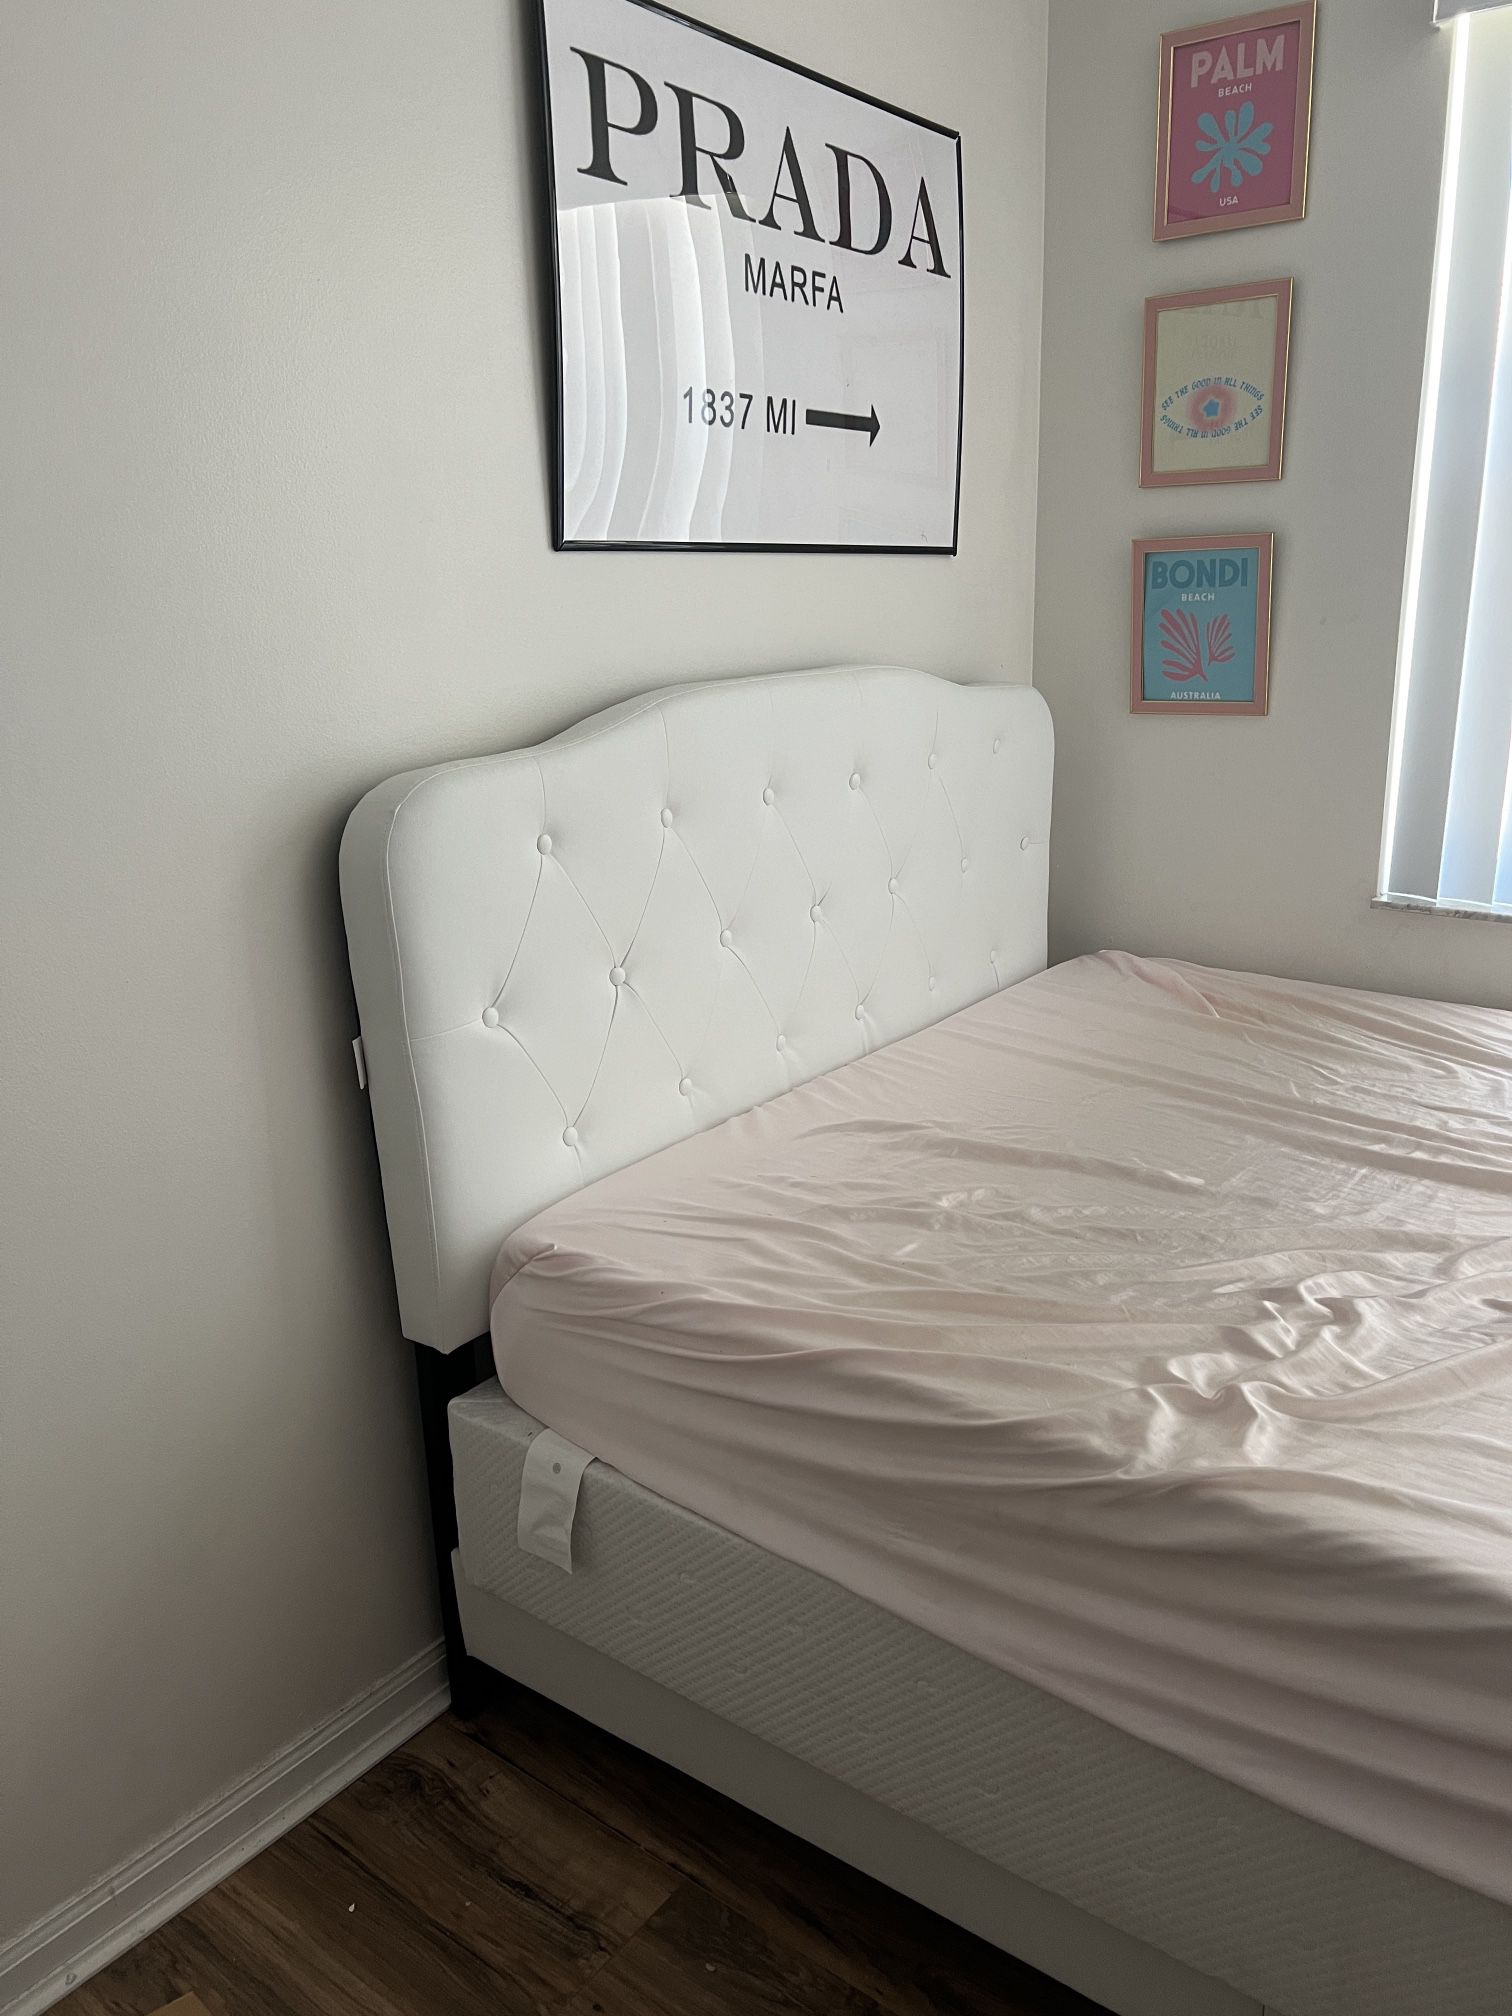 Bed Frame And Headboard